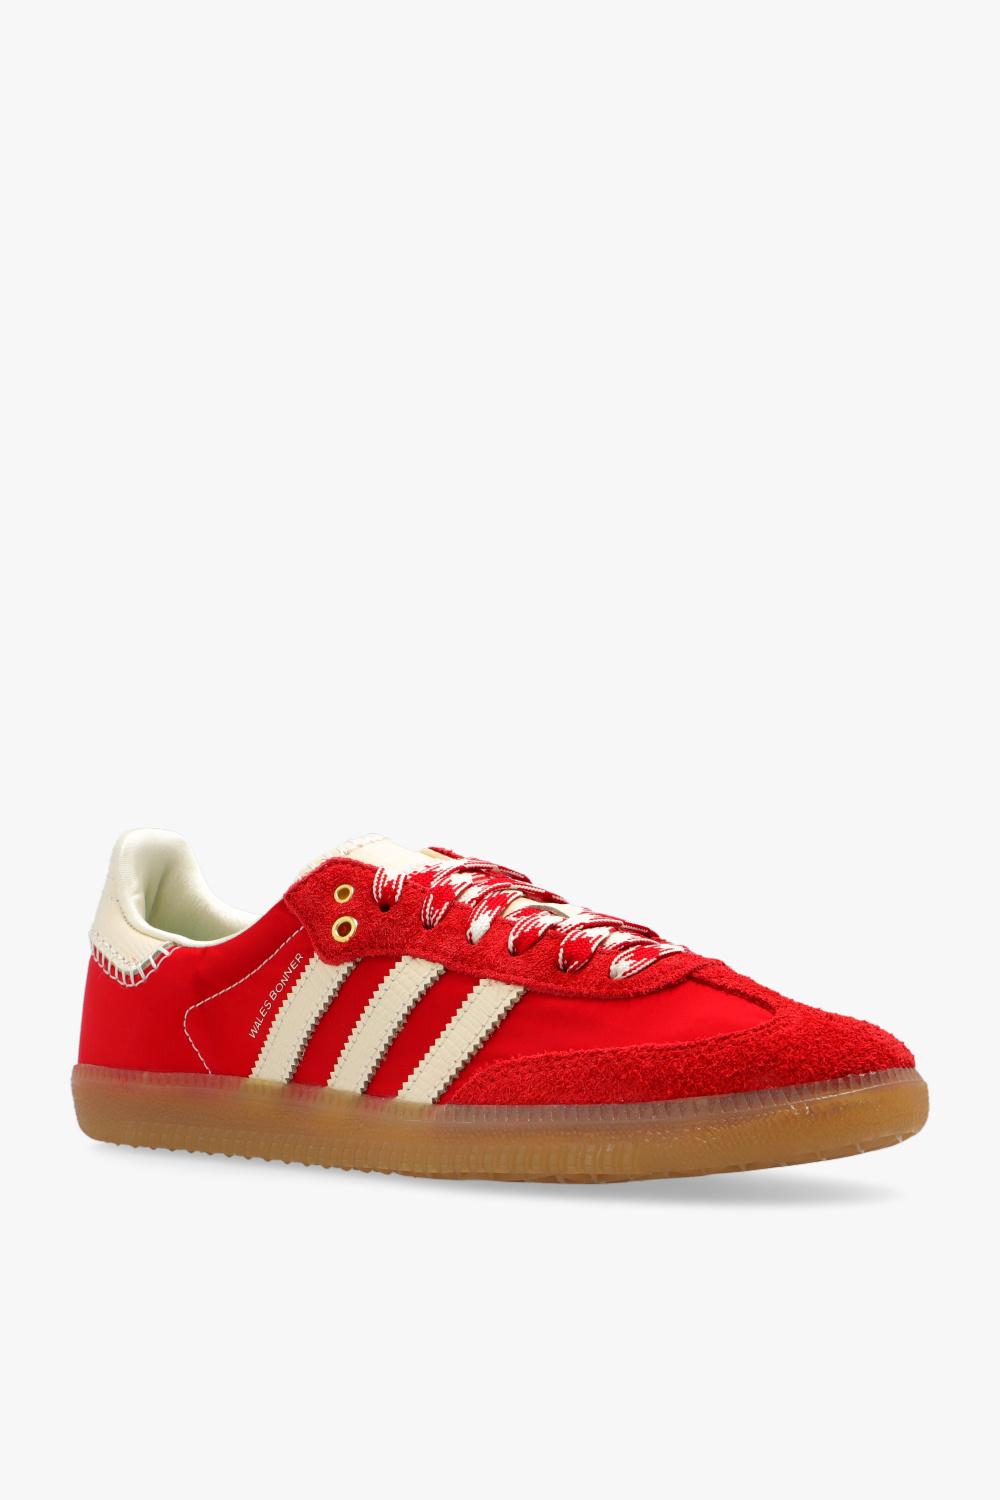 adidas Originals X Wales Bonner in Red | Lyst